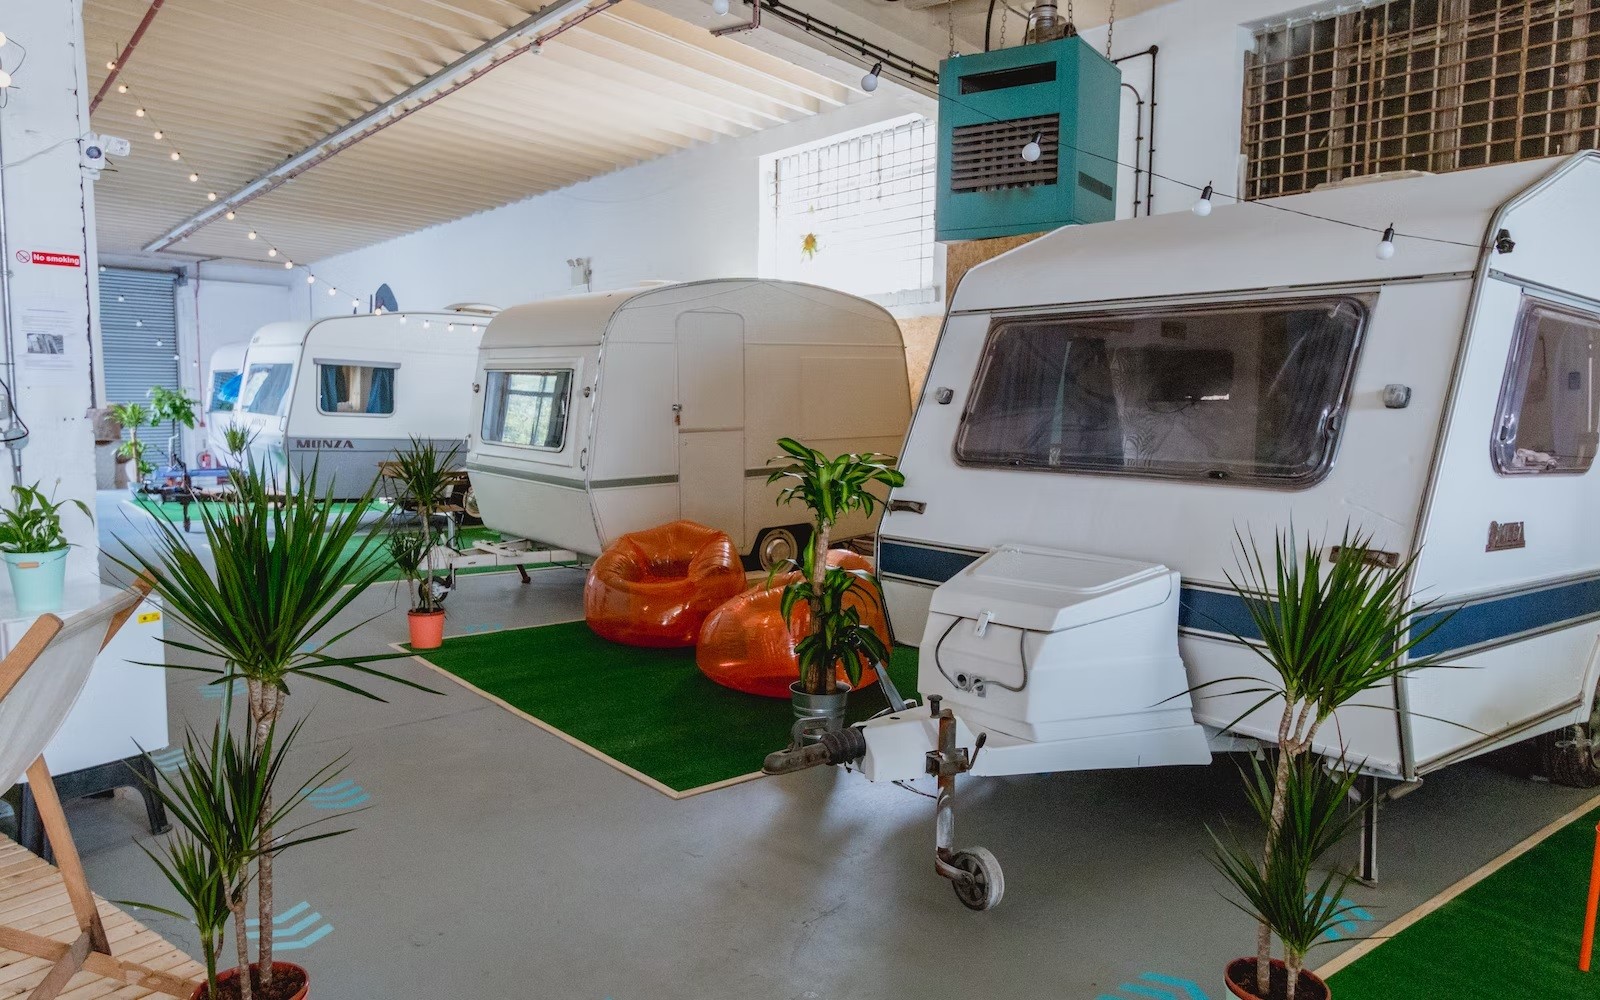 Towed Town Camping Is an Indoor Campground Offering Accommodation in Five  Vintage Caravans - autoevolution